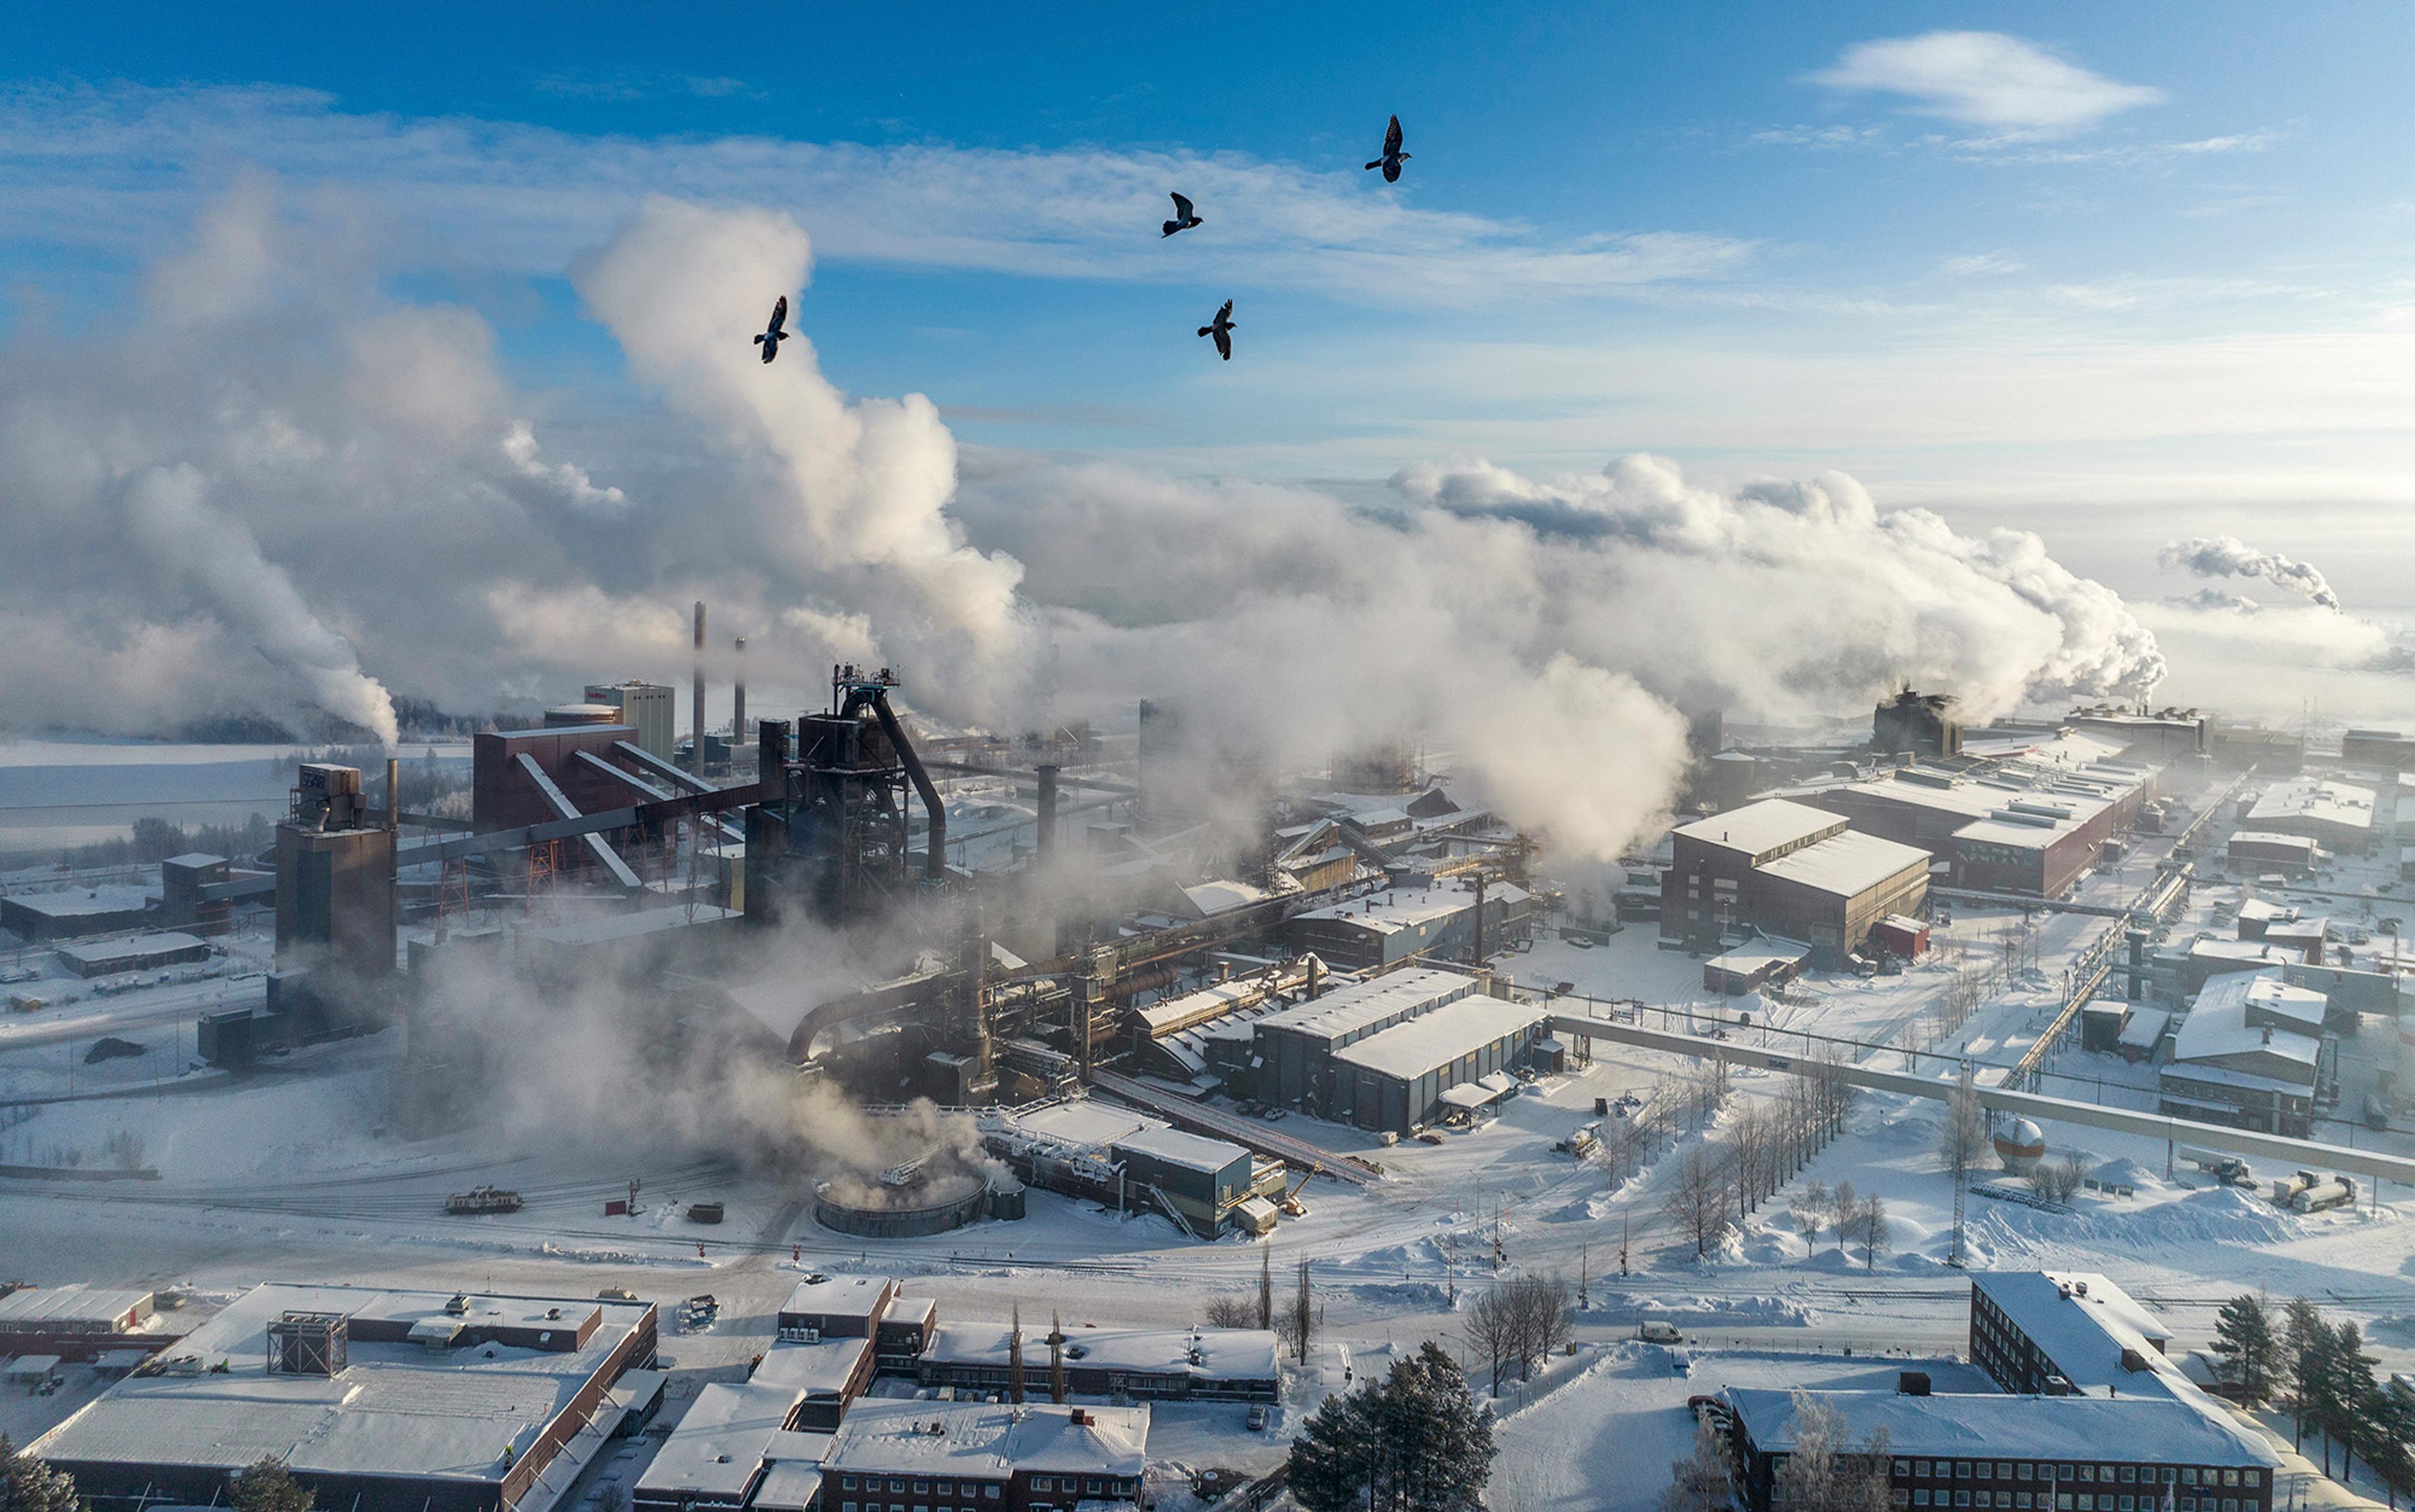 Aerial view of an industrial site emitting smoke, surrounded by snow-covered buildings and landscape, under a clear blue sky with birds flying overhead.